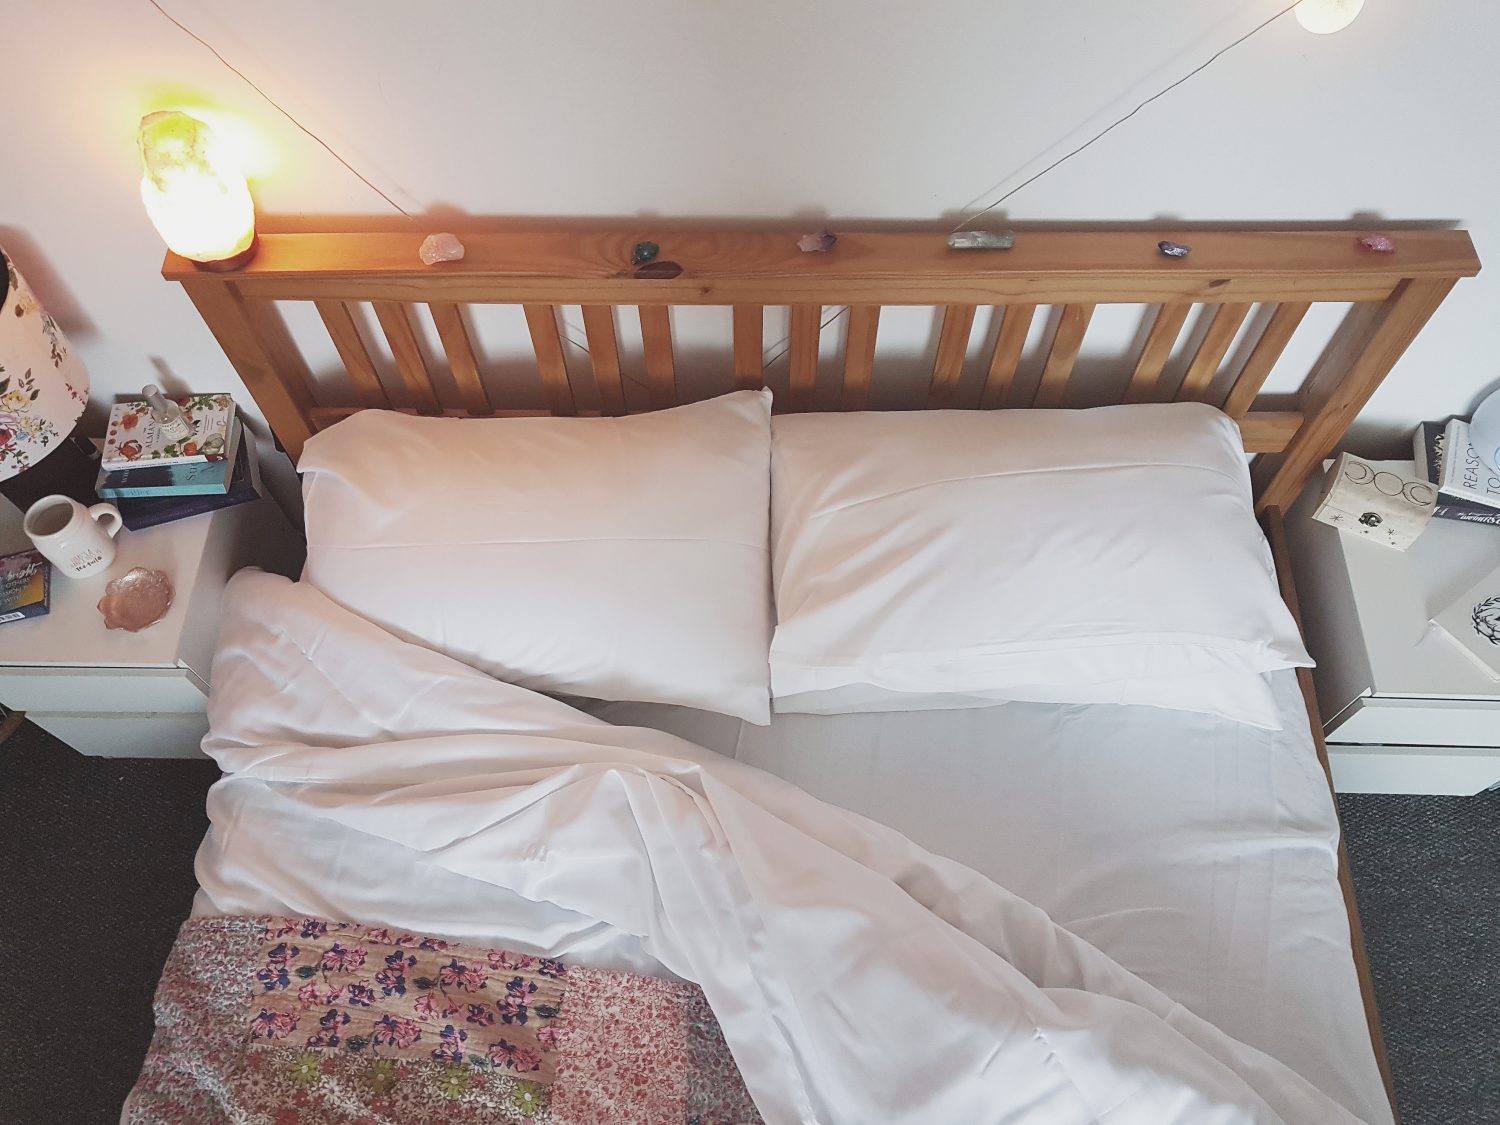 Room swapping, redecorating and new duvets